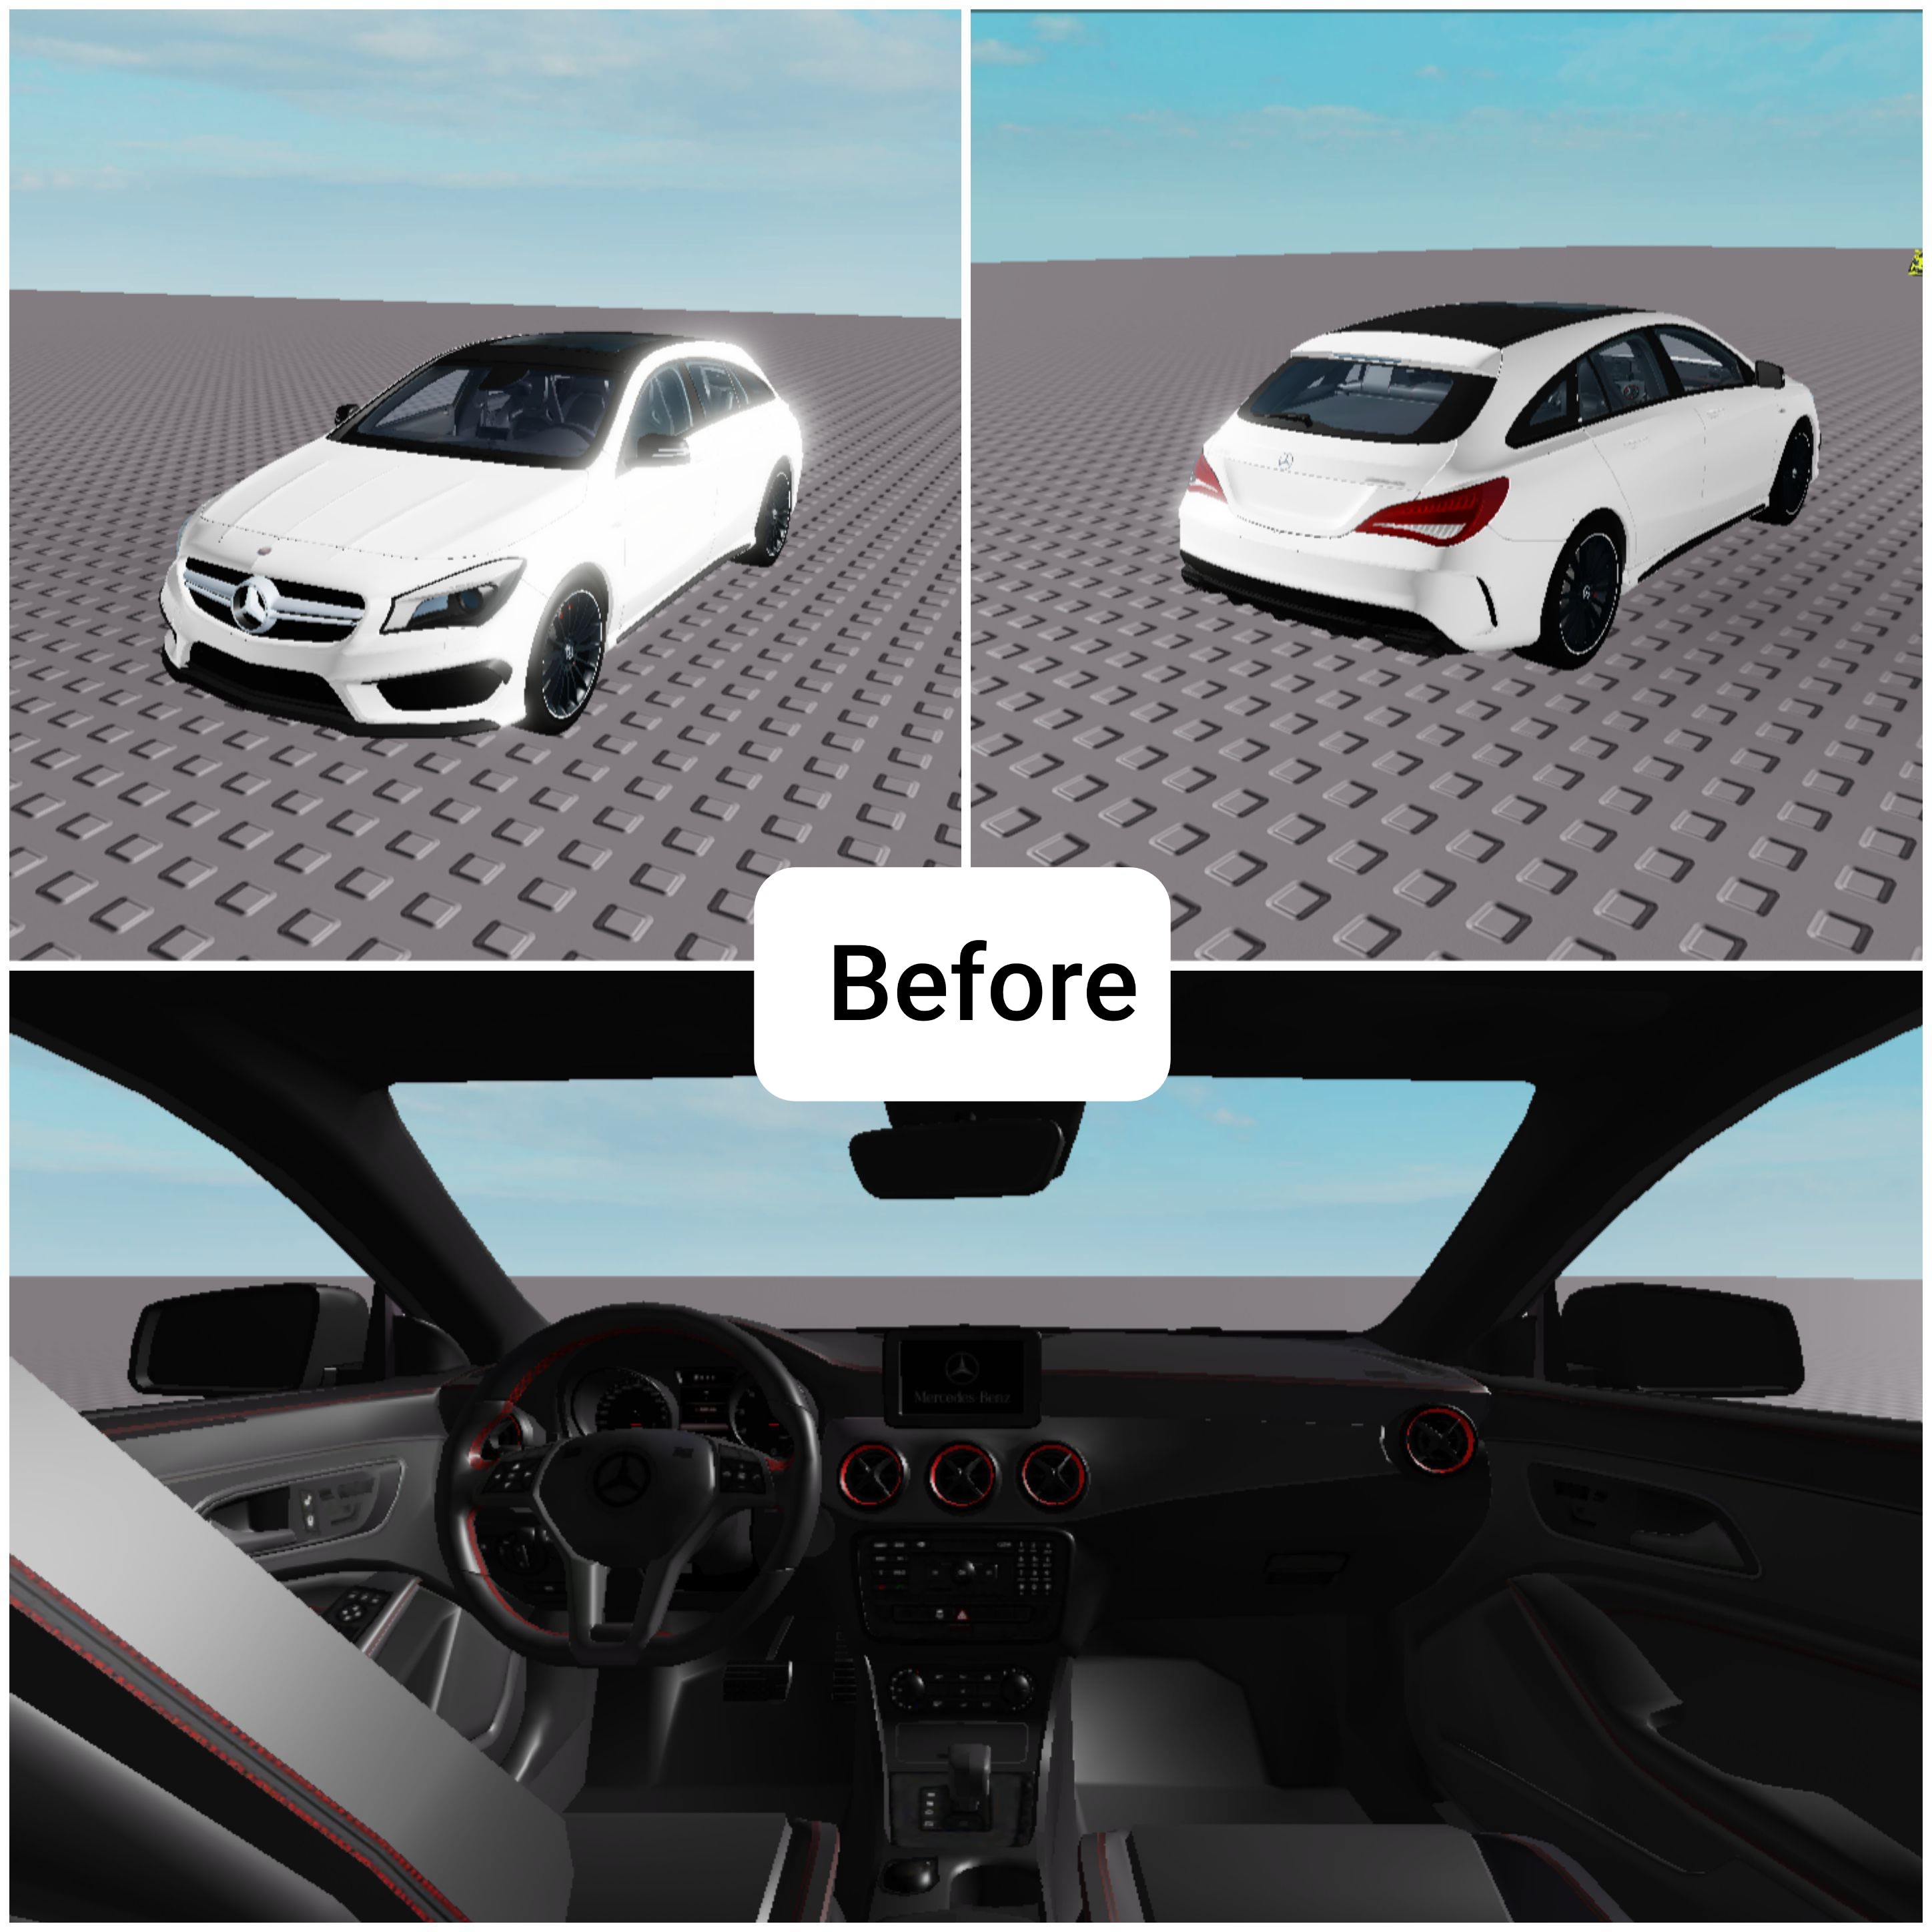 Modify Your Car Model In Roblox Studio With The Specifications You Desire By Sebastian Yeong Fiverr - how to make your own models on roblox studio